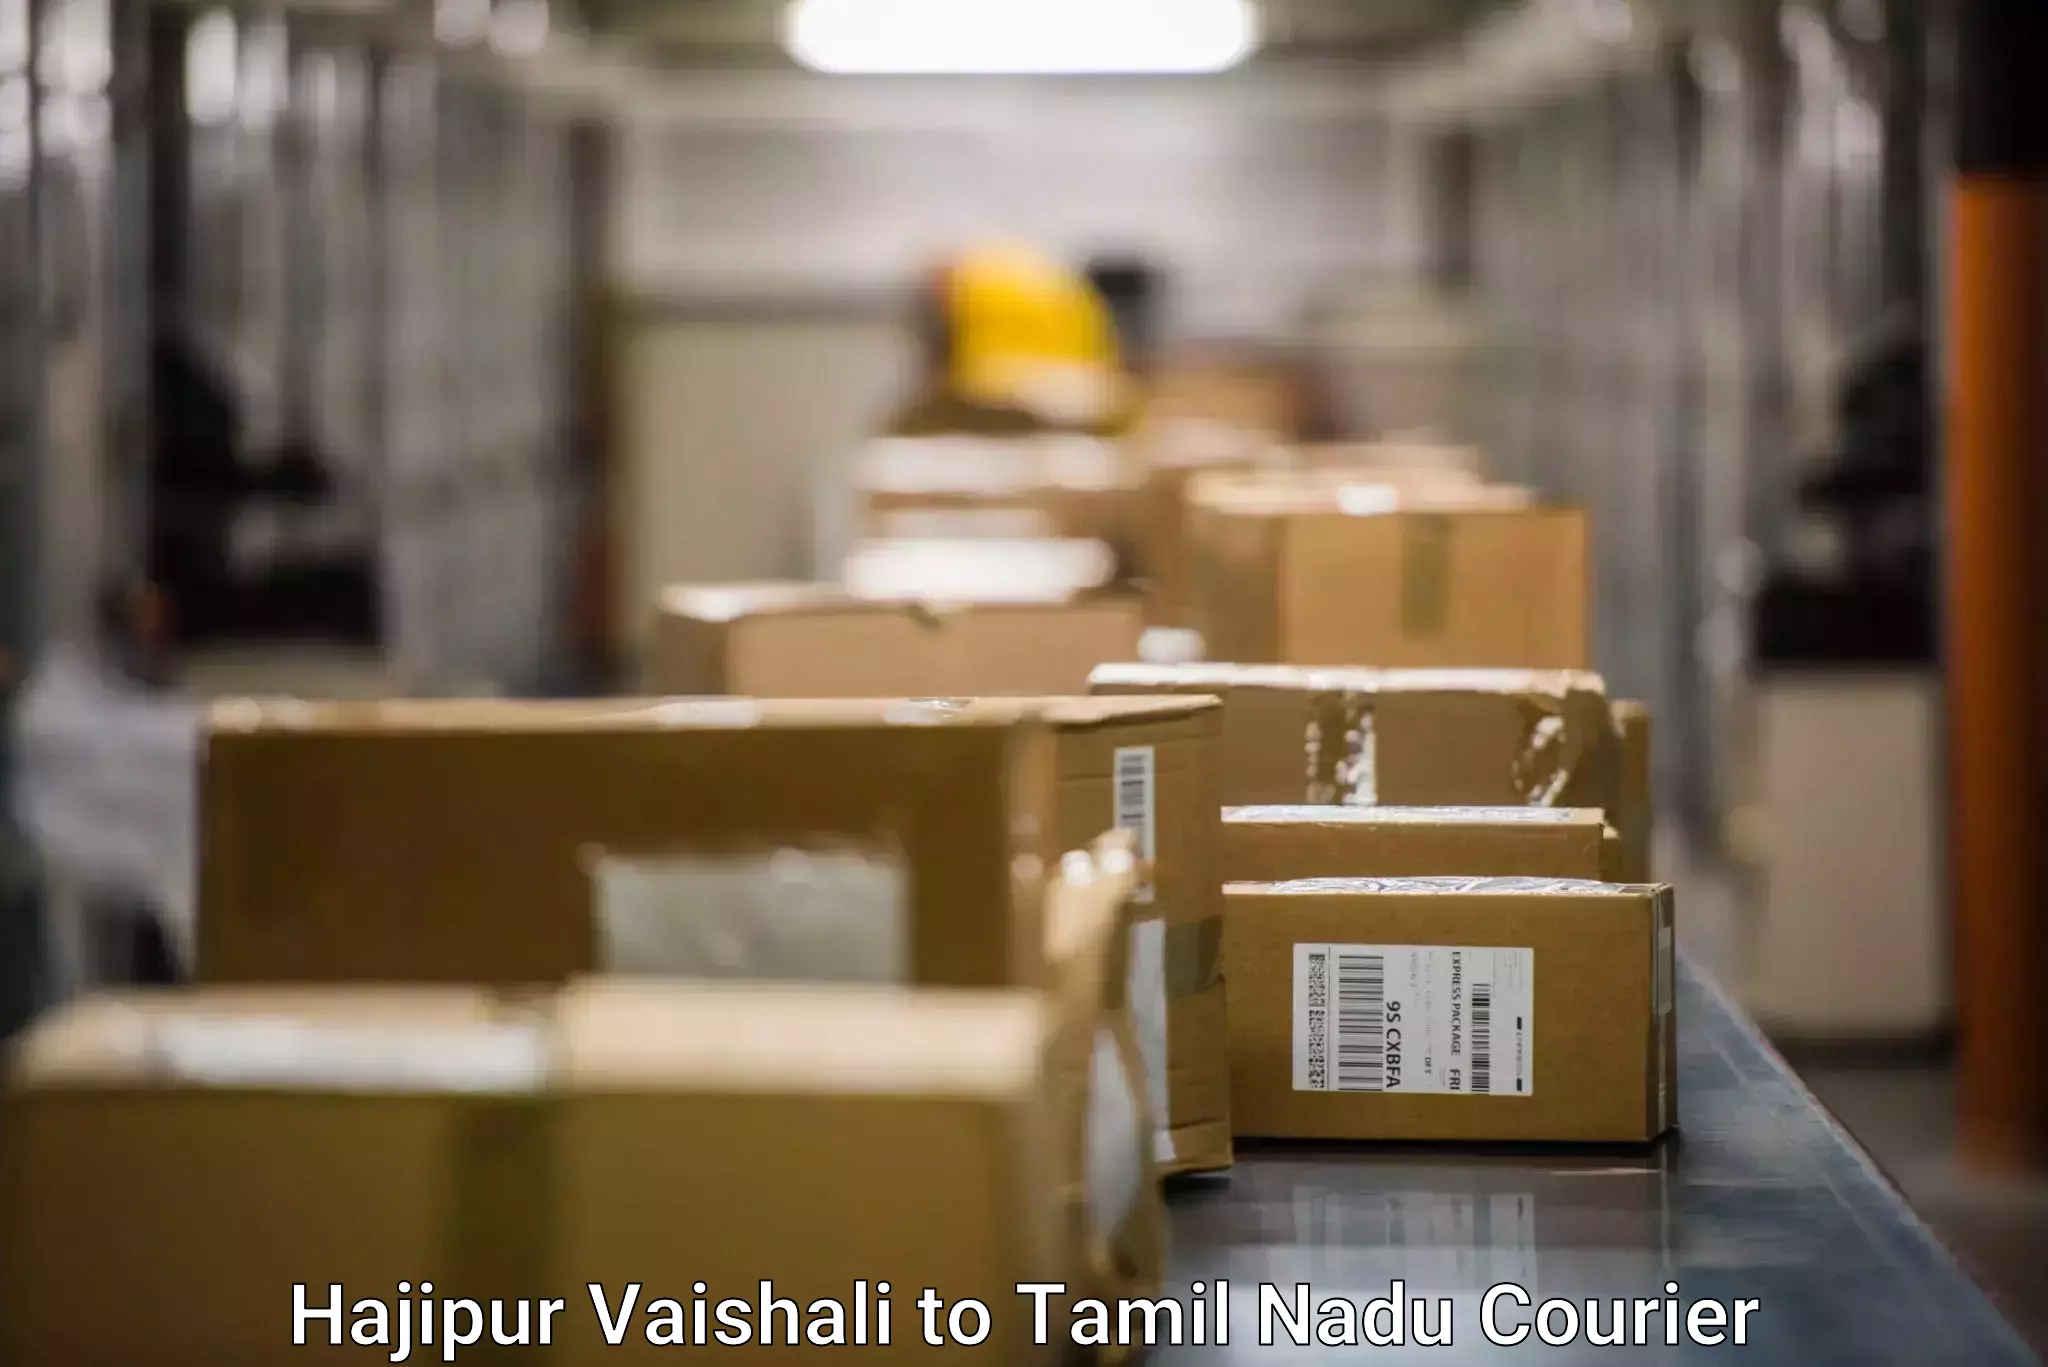 Reliable shipping partners Hajipur Vaishali to Sri Ramachandra Institute of Higher Education and Research Chennai